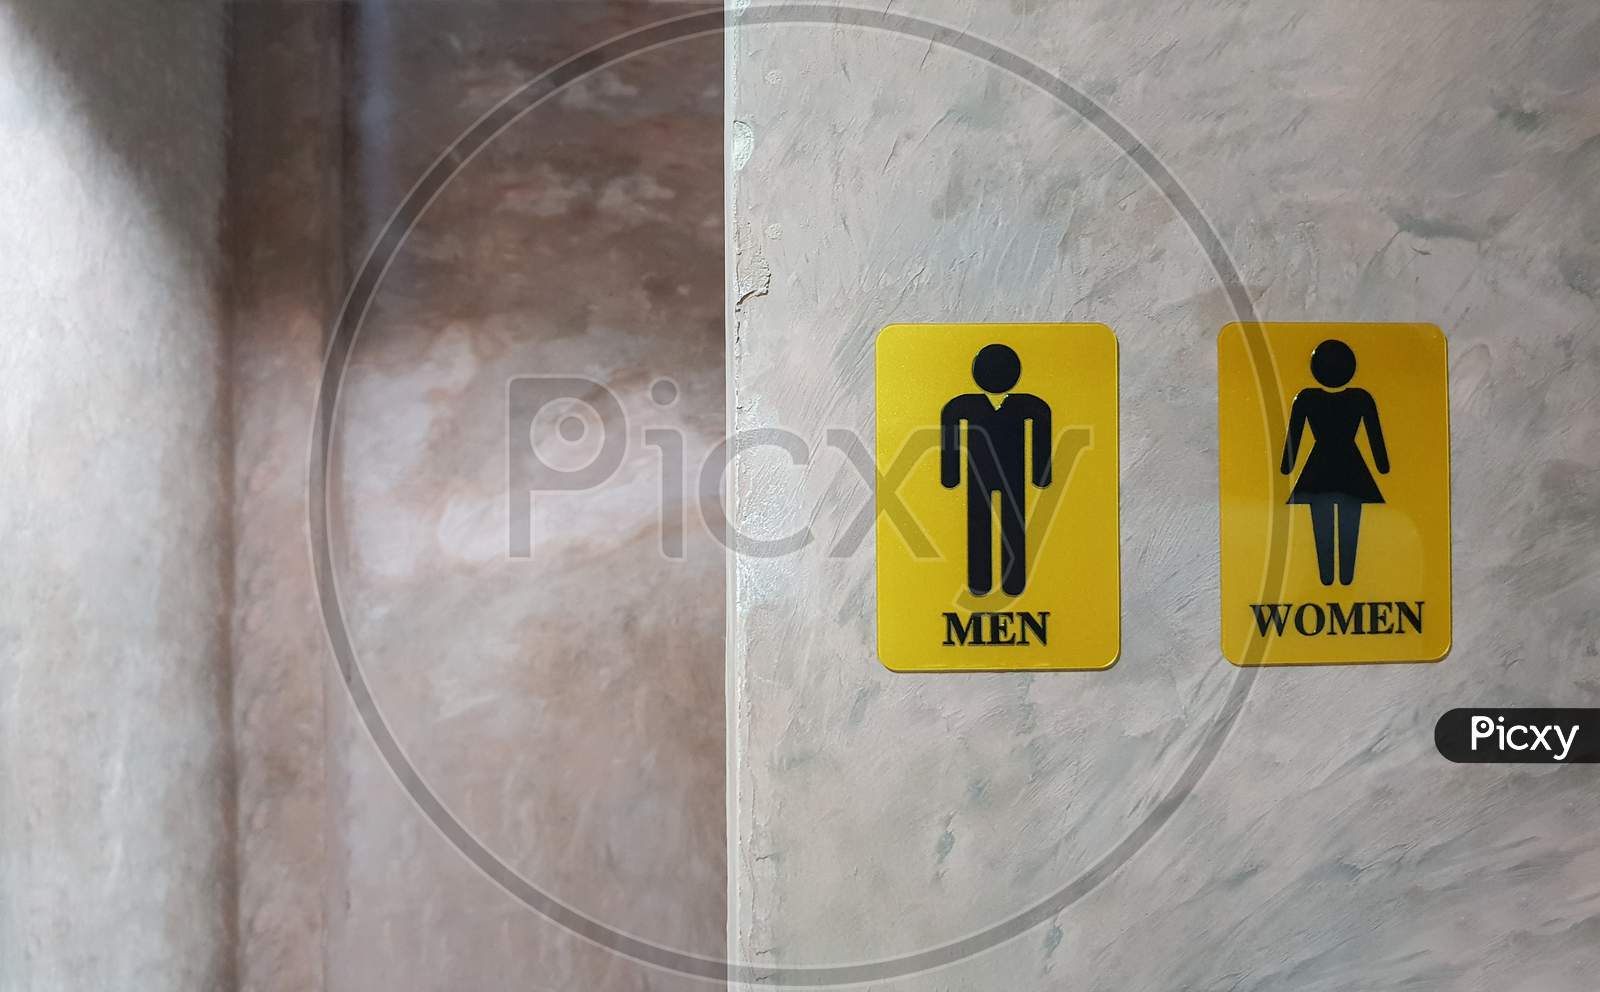 Public Toilet Of Men And Women. Sign Of Lady And Gentleman Washroom Called Wc. Mixed Gender Symbol Toilet And Restroom Behind Concrete Wall Decorate By Vintage Style In Department Store. Text Message